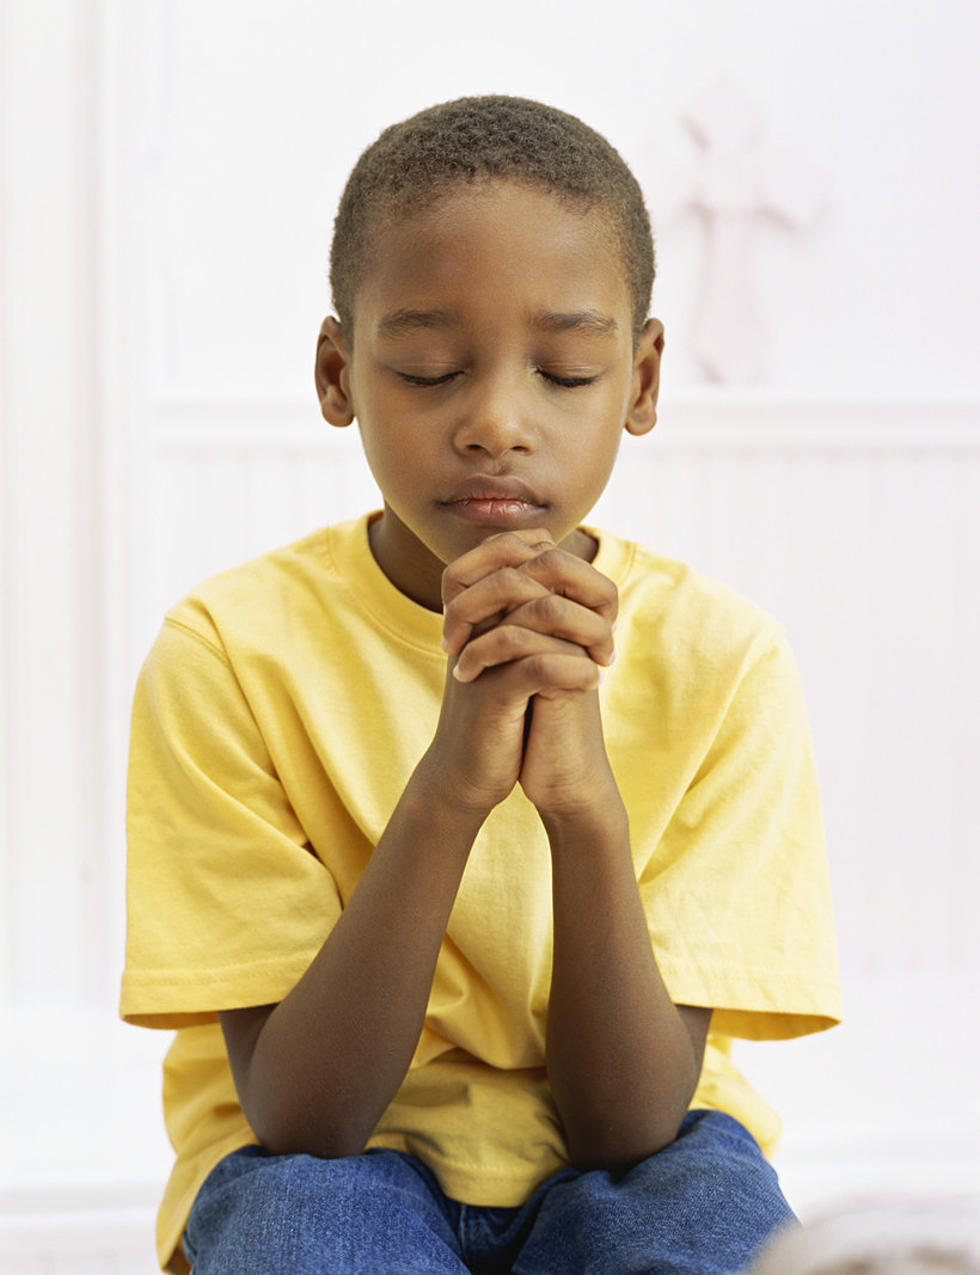 Guiding Prayers for Kids Going Back to School in Alabama